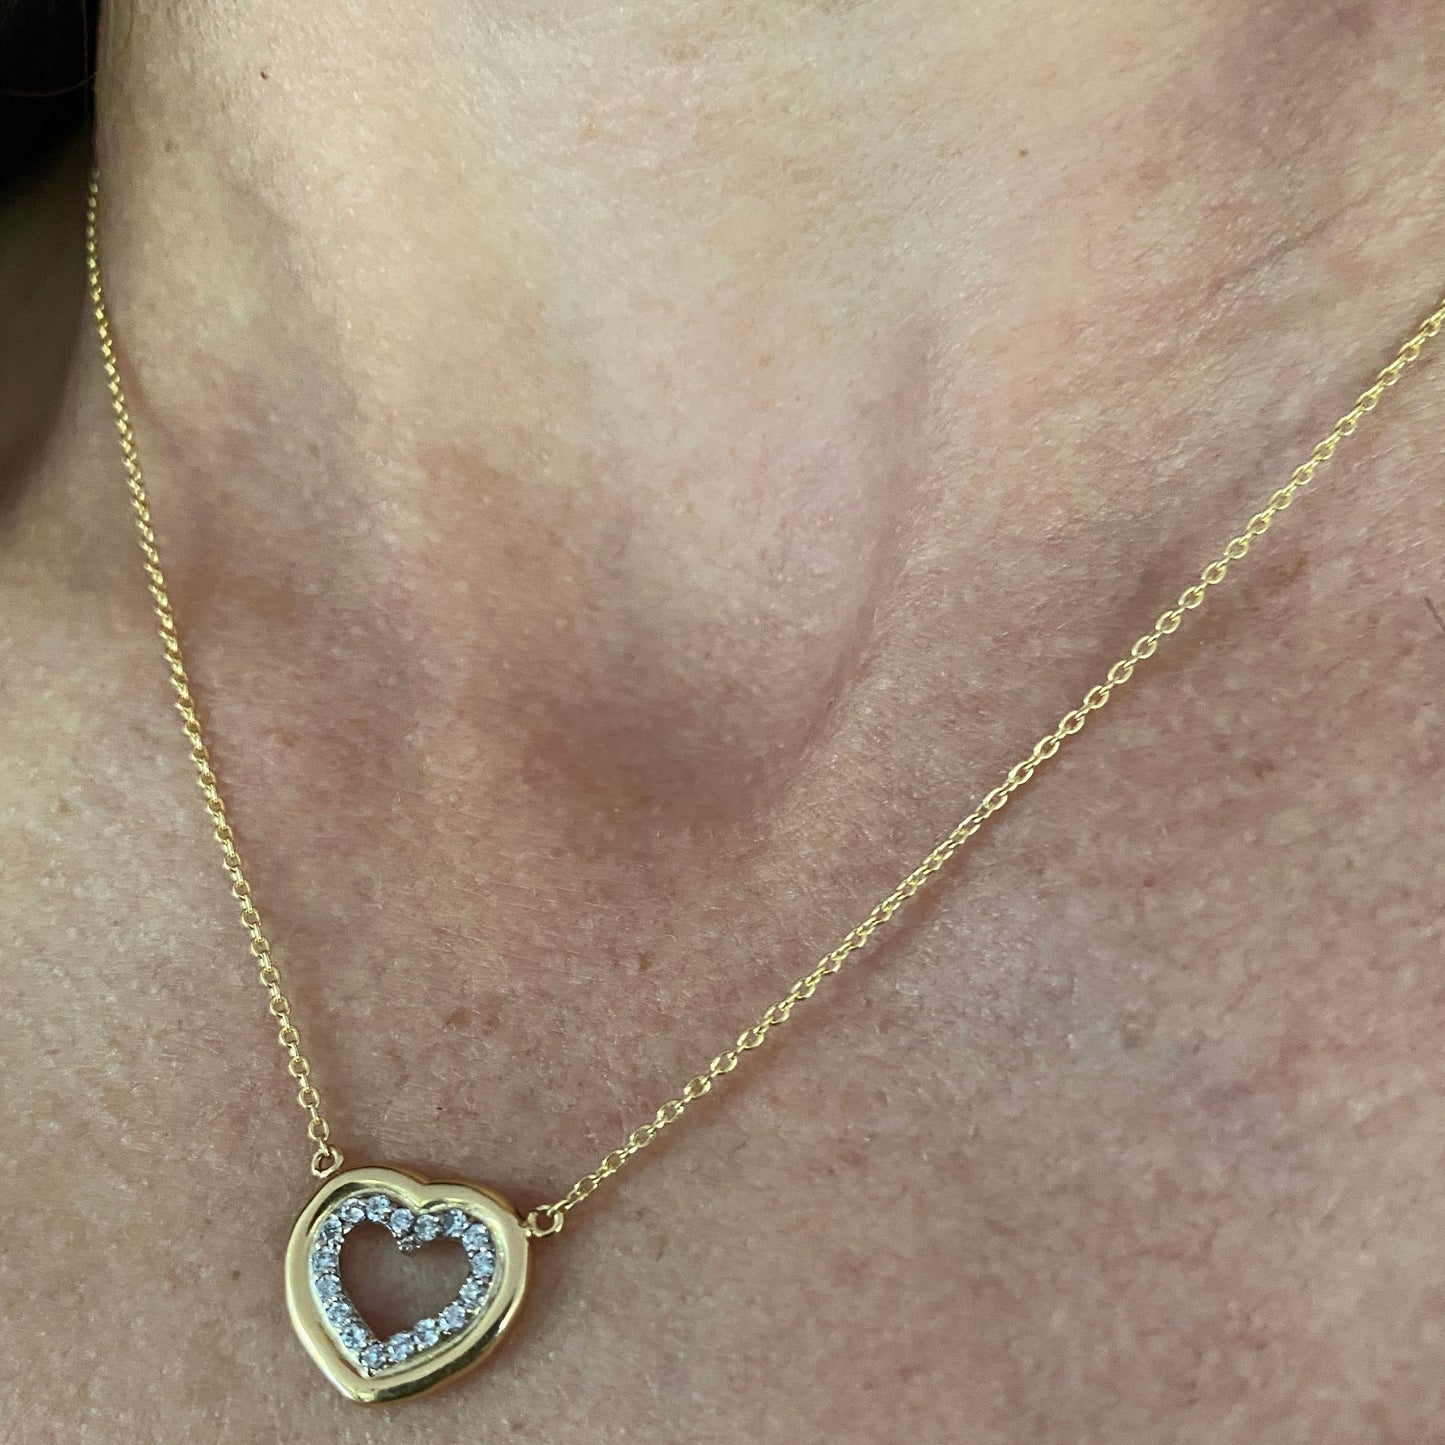 Hearts on Fire - 18kt Diamond and Yellow Gold Heart Necklace